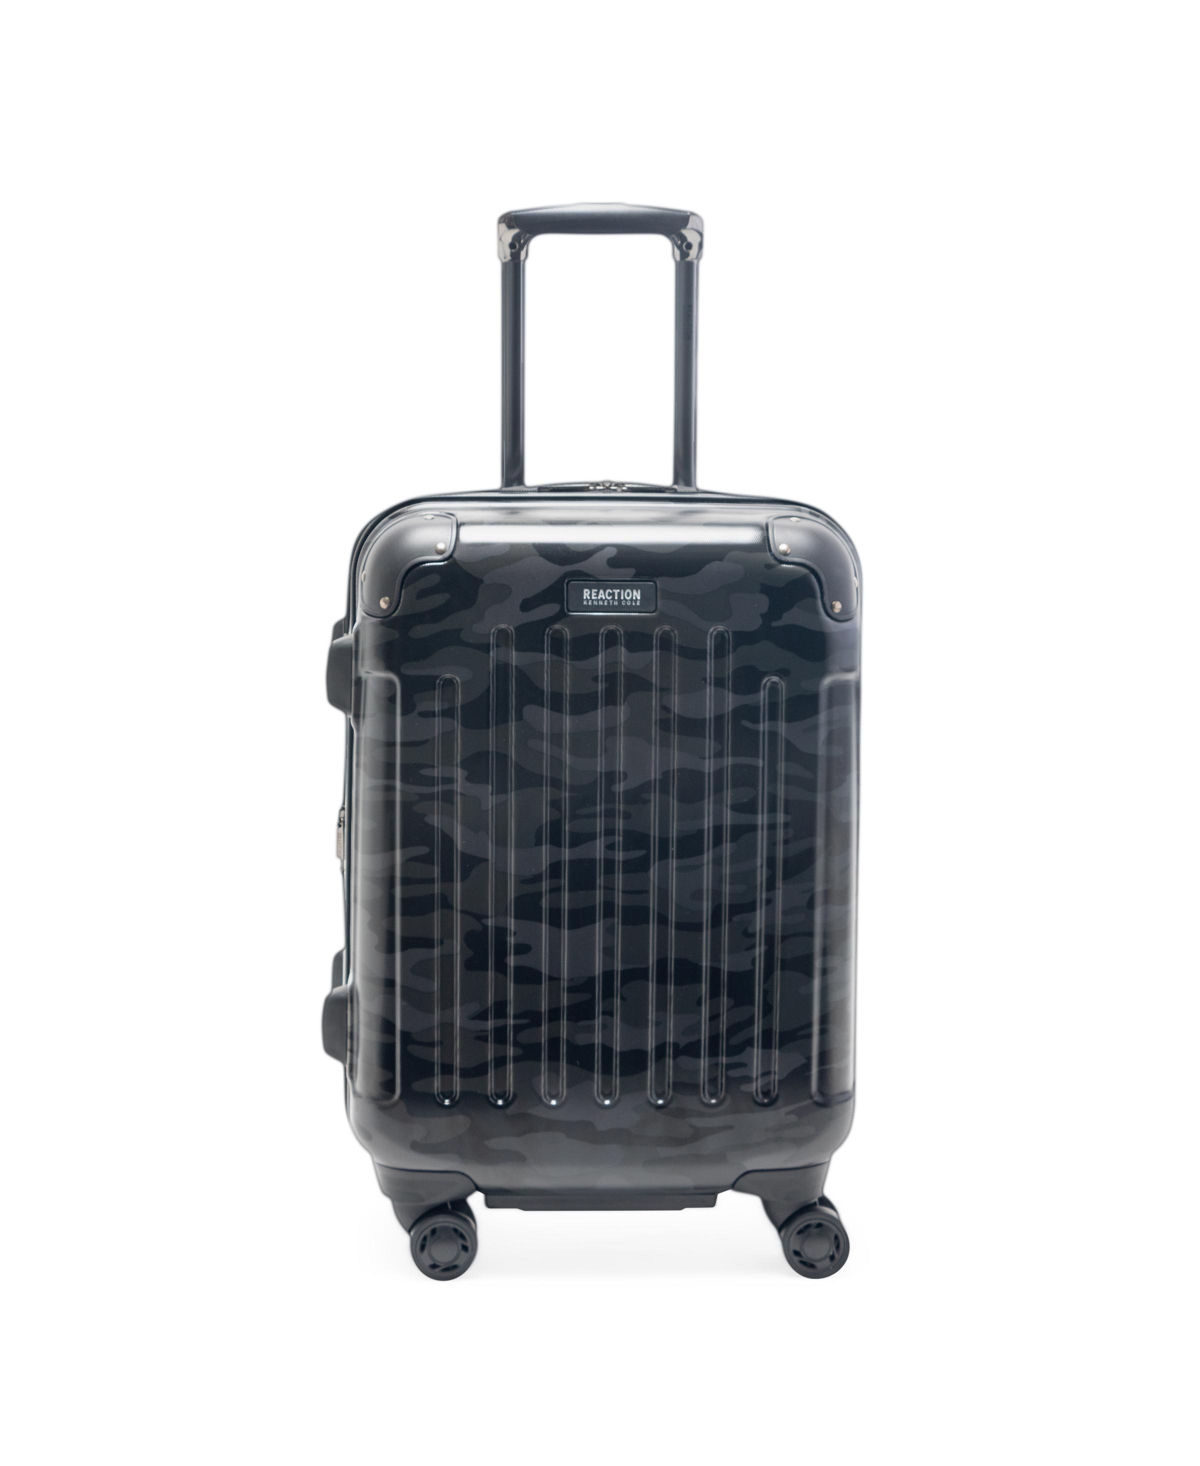 Kenneth Cole Reaction Renegade Camo 20" Hardside Expandable Luggage In Camo Black